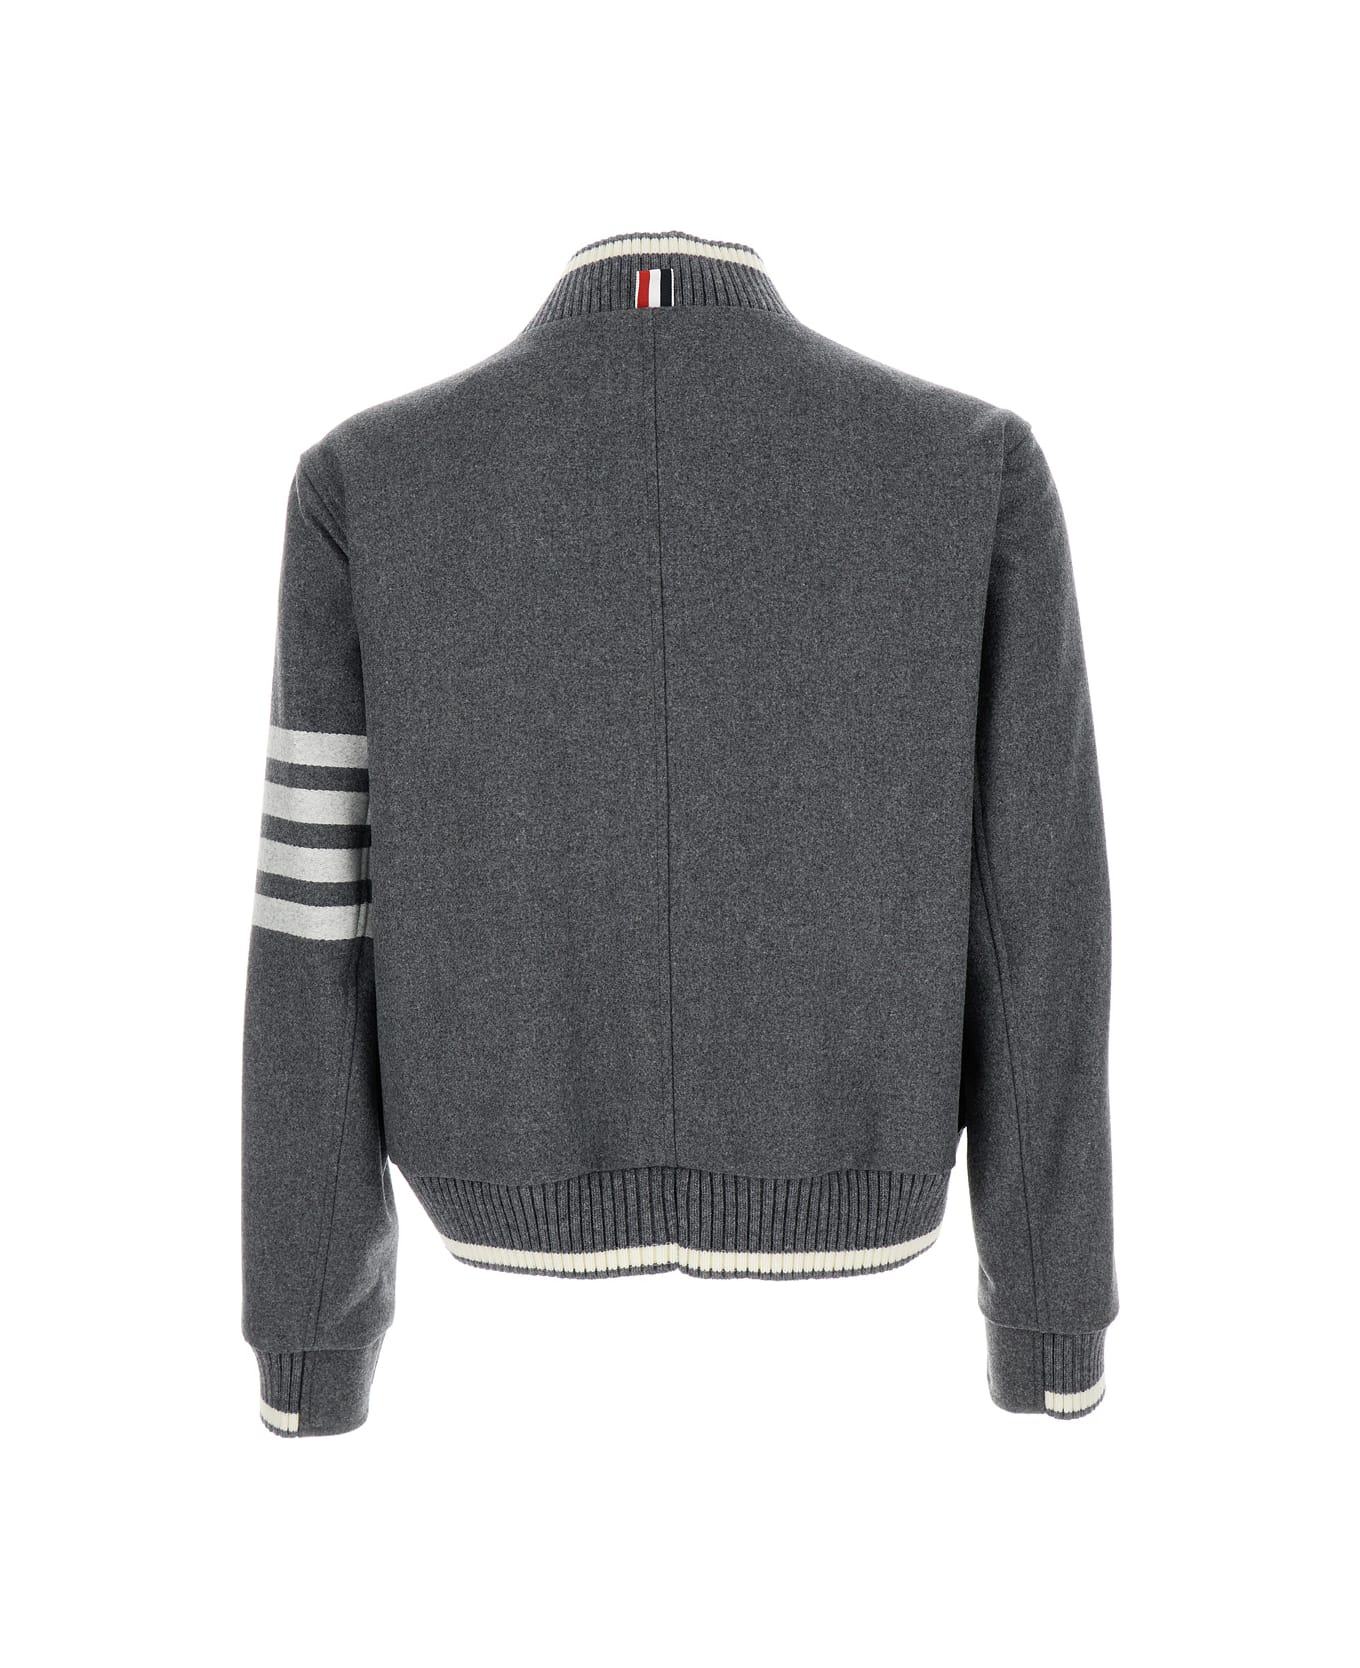 Thom Browne Grey Bomber Jacket With Signature 4bar Stripe In Wool Man - Grey